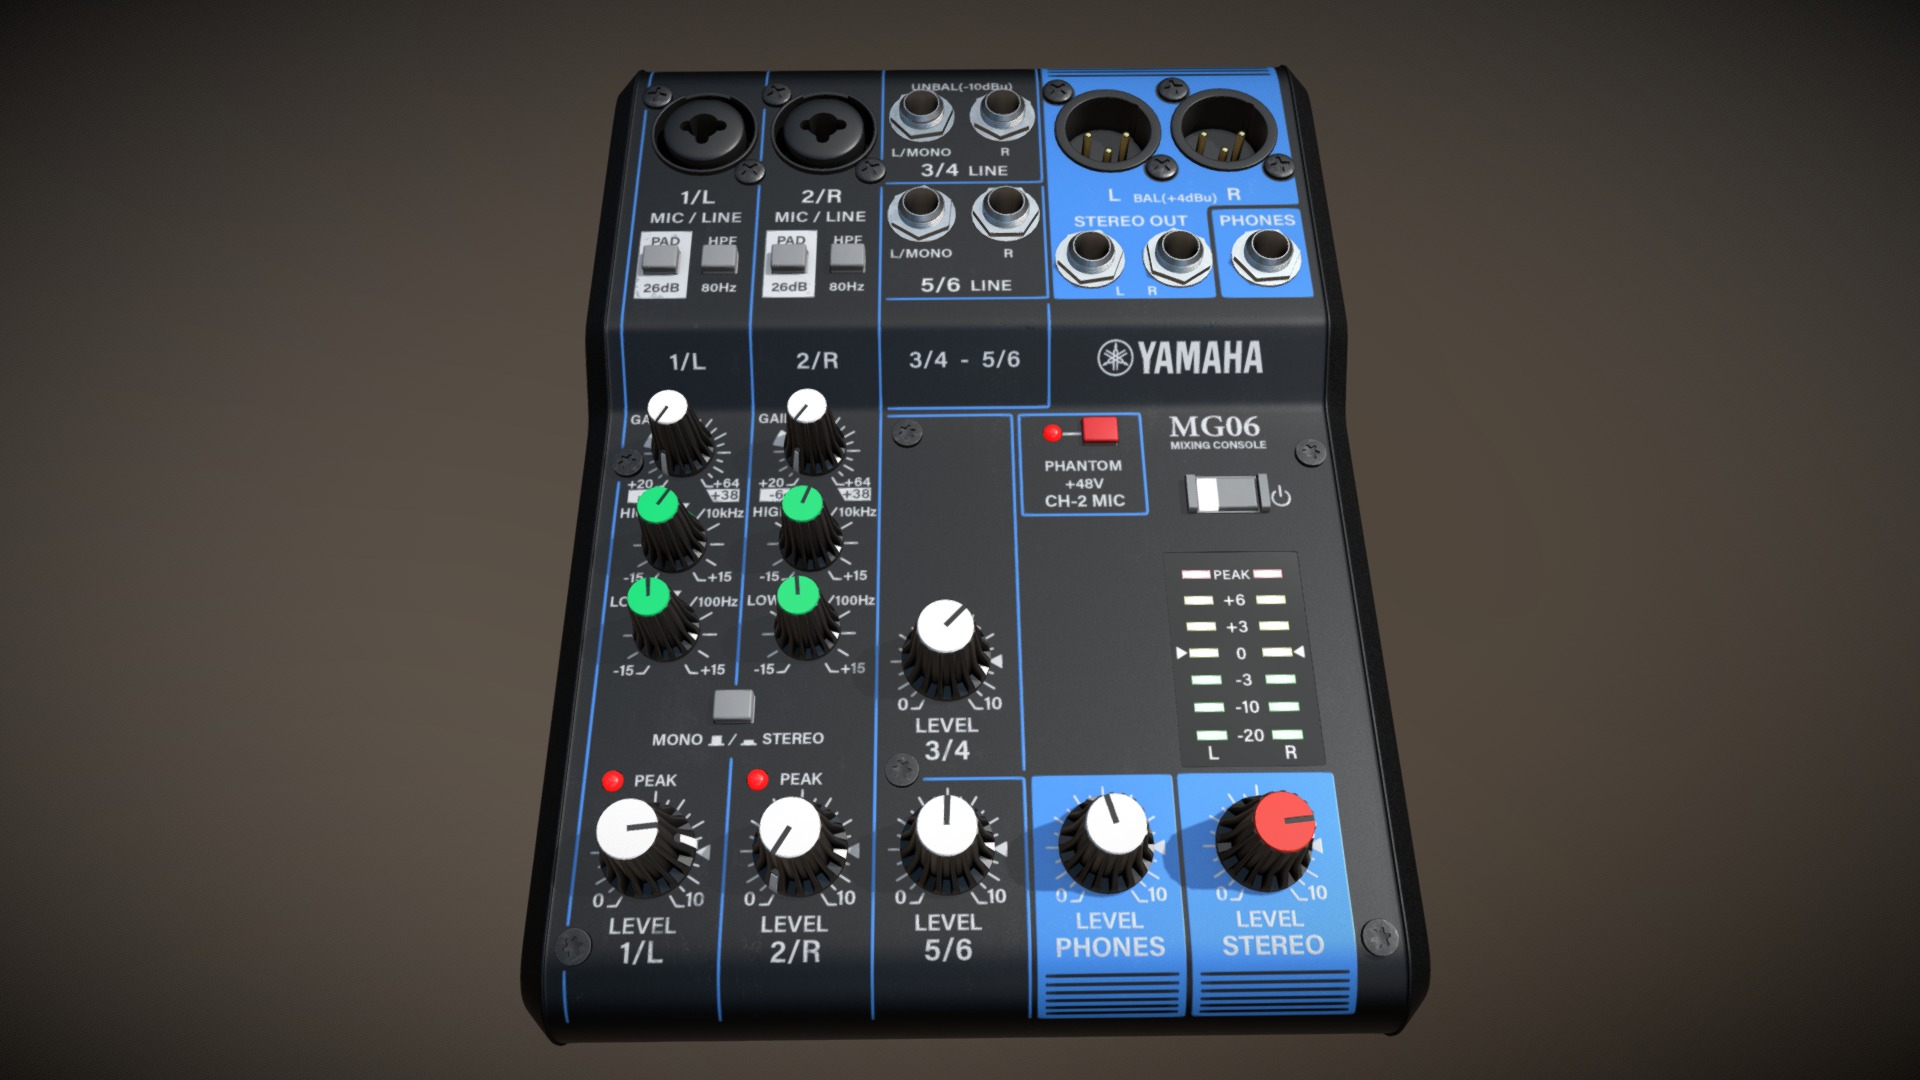 3D model Yamaha MG06 Mixer Highpoly - This is a 3D model of the Yamaha MG06 Mixer Highpoly. The 3D model is about a black rectangular object with buttons and a white and blue background.